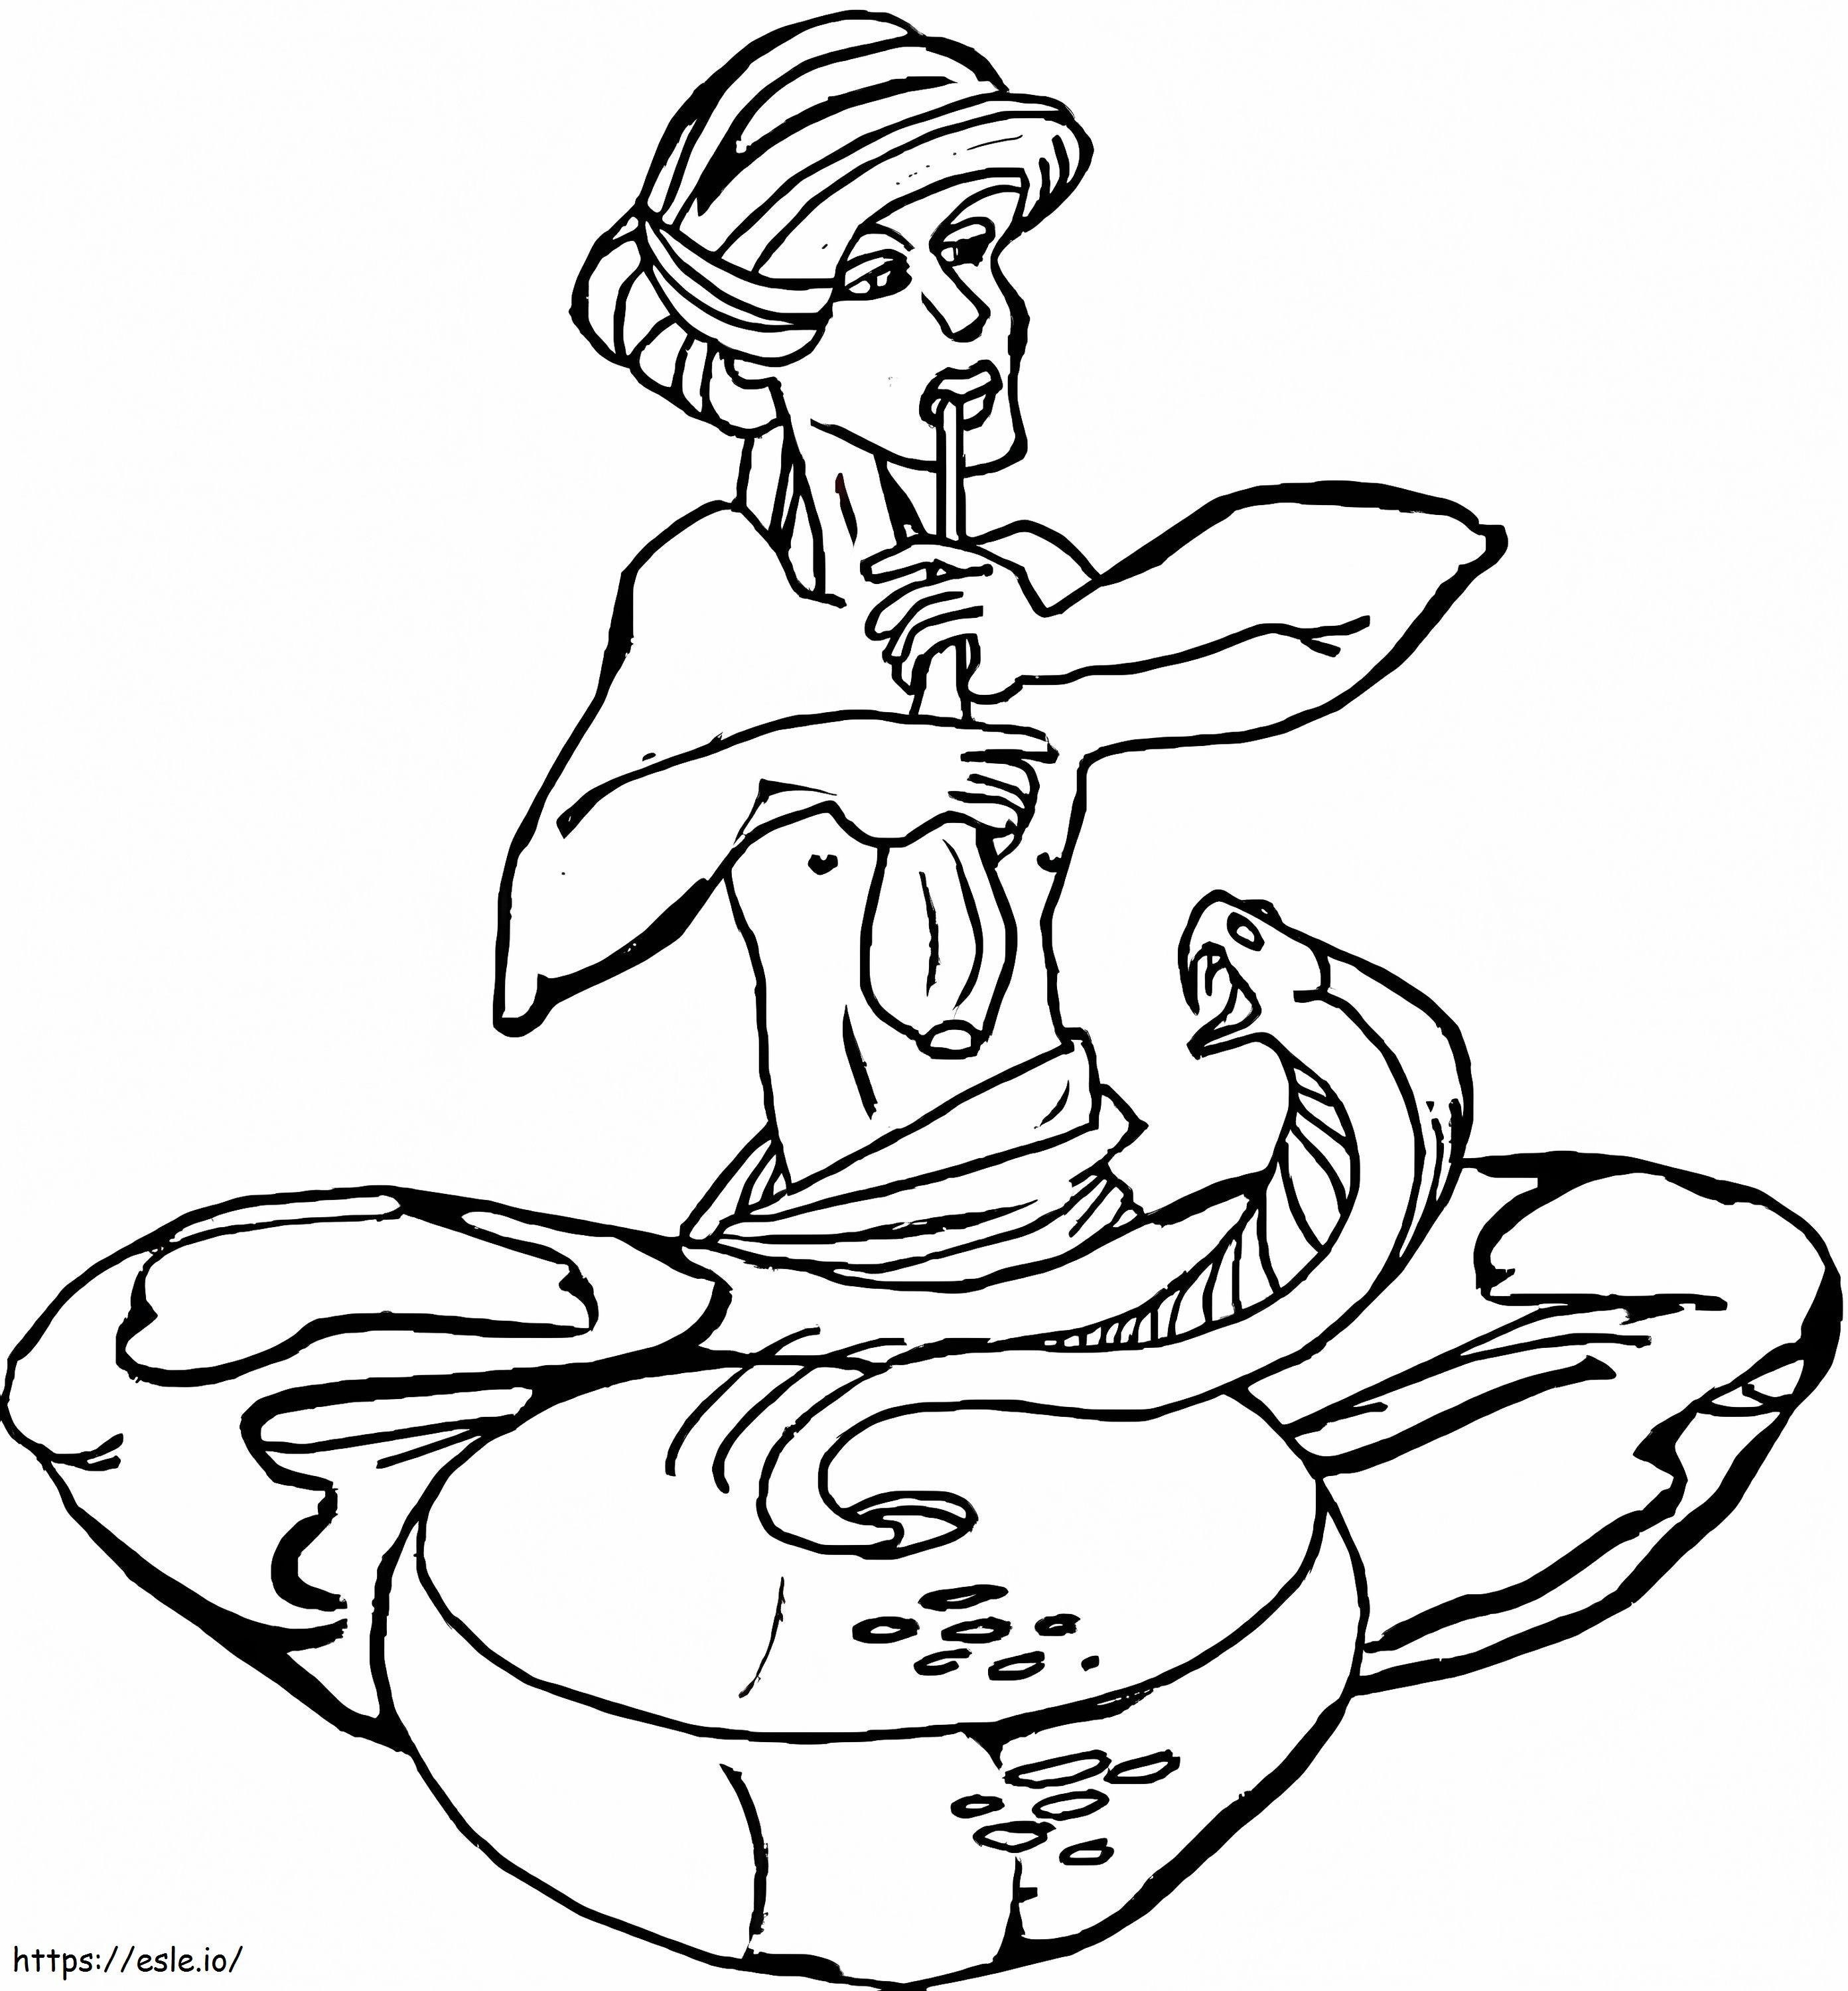 Indian Cobra coloring page